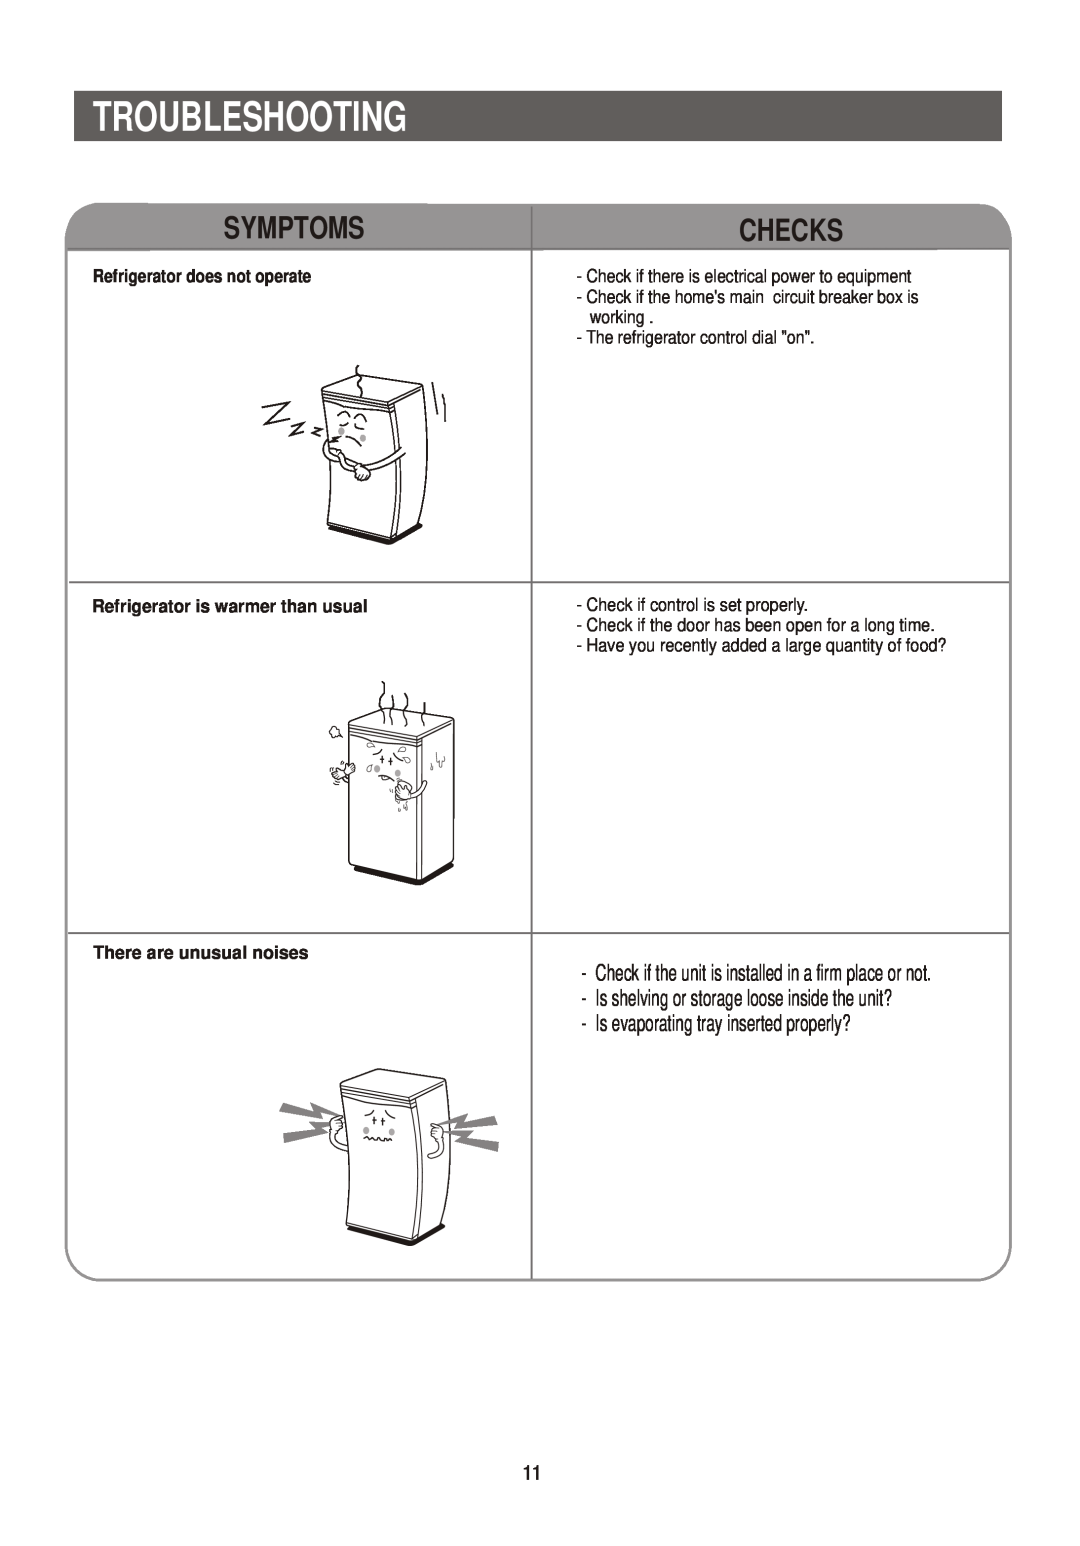 Samsung SRG-150 manual Troubleshooting, Symptoms, Checks, Refrigerator does not operate, Refrigerator is warmer than usual 